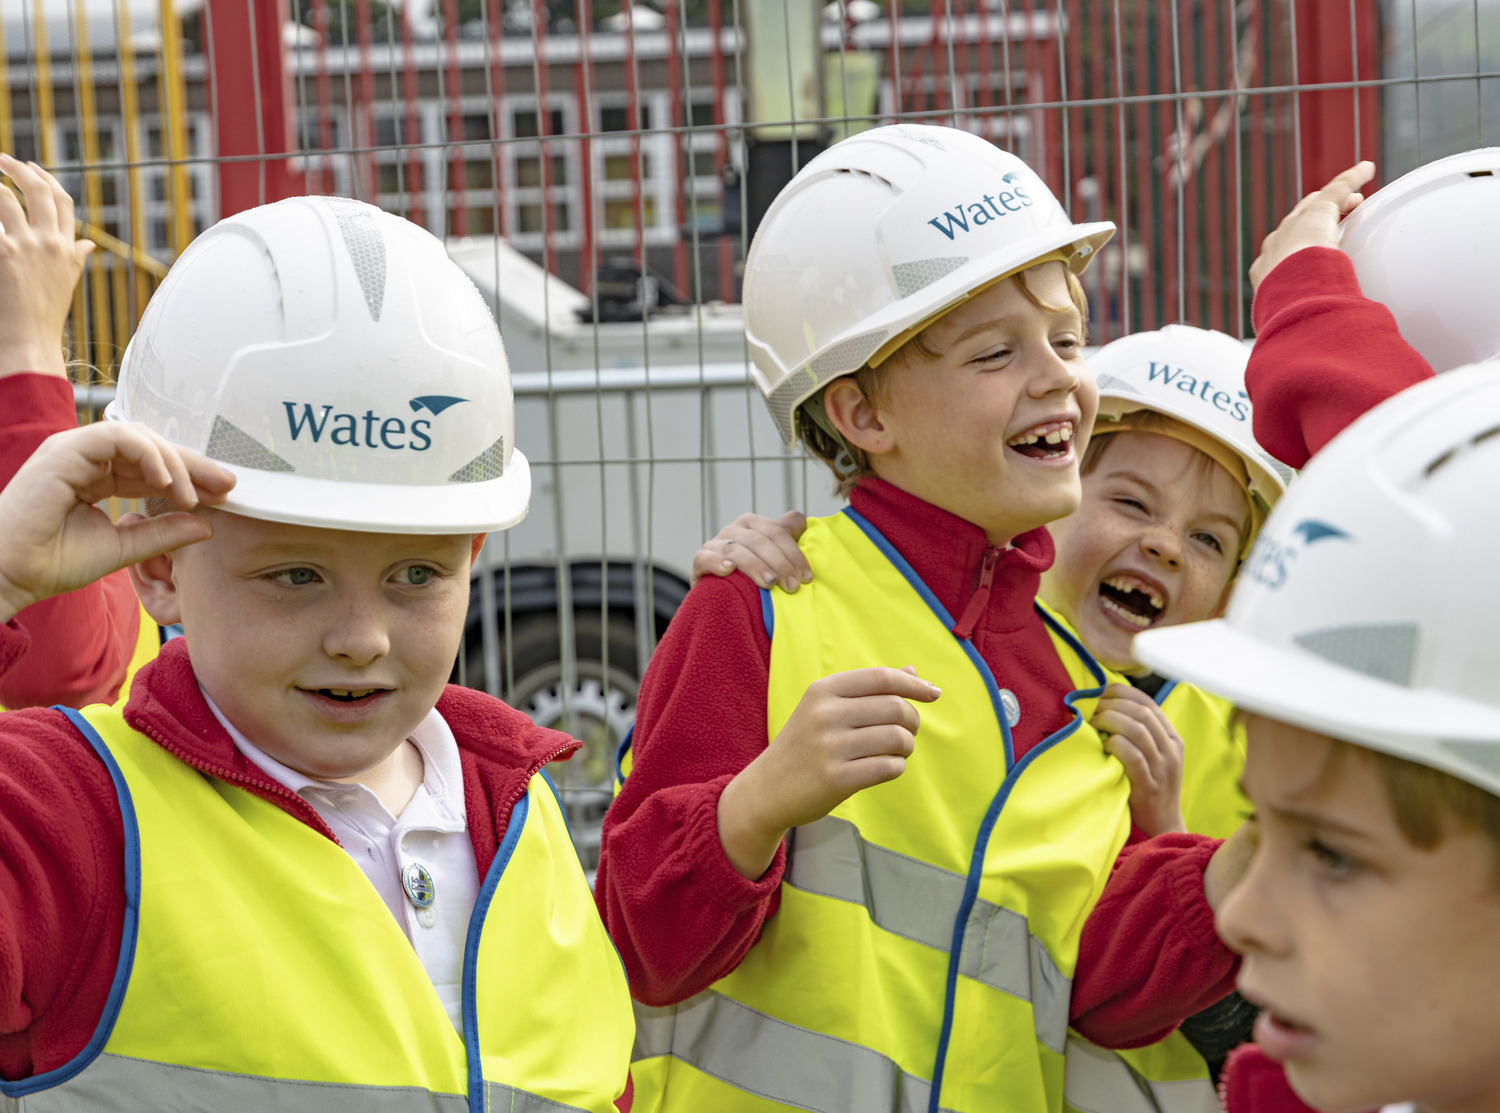 Wates secures £90m loan linked to sustainability ambitions